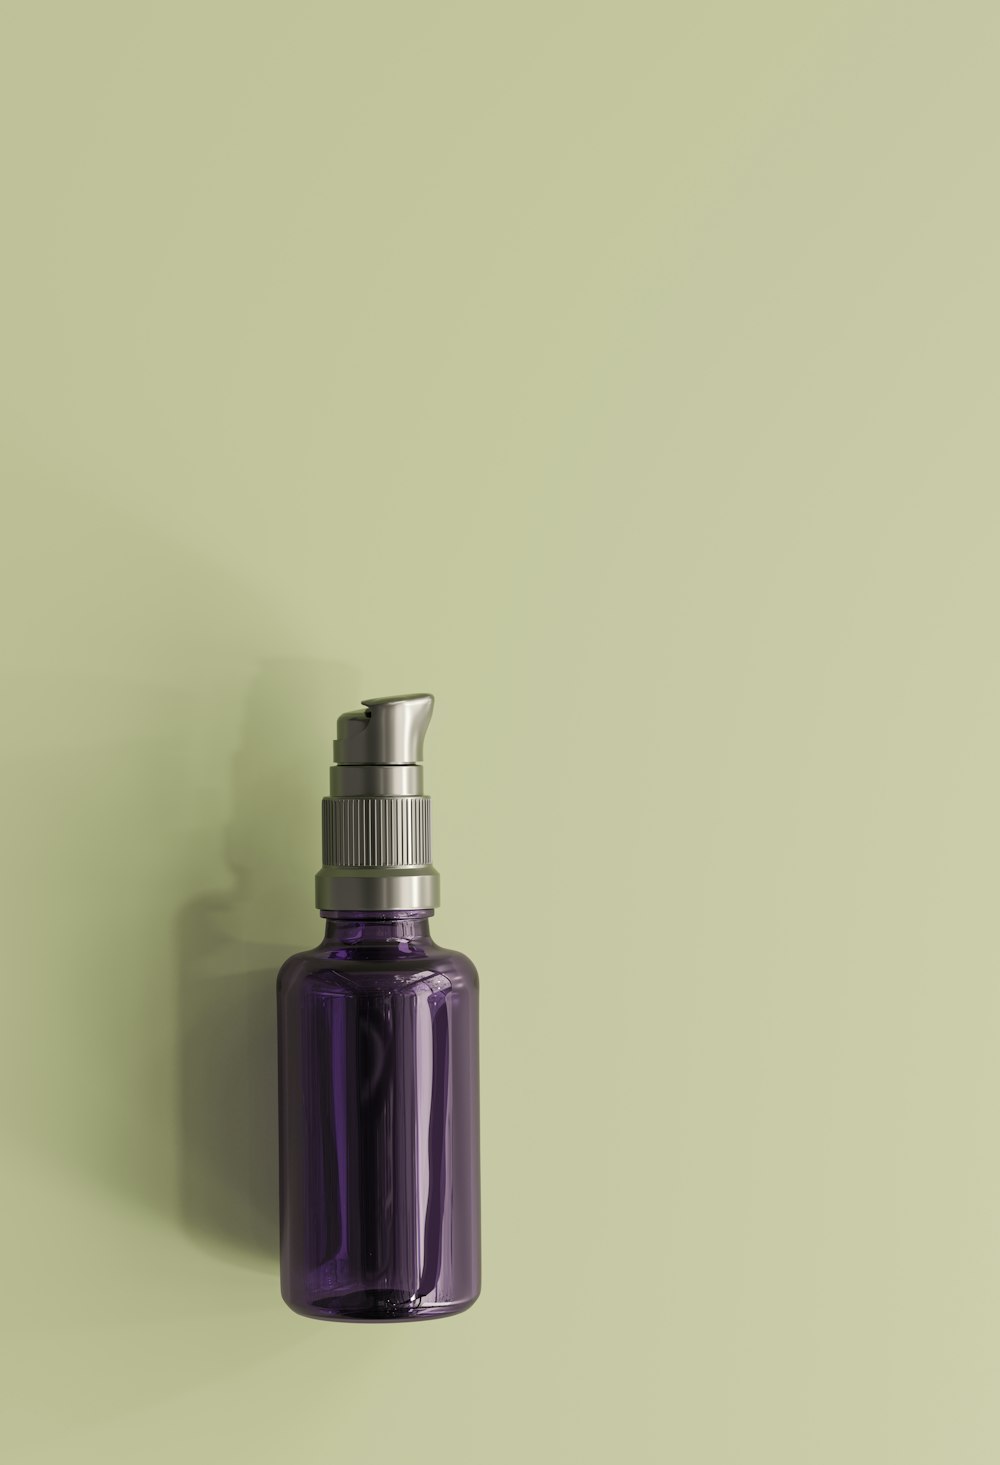 a purple glass bottle with a silver top